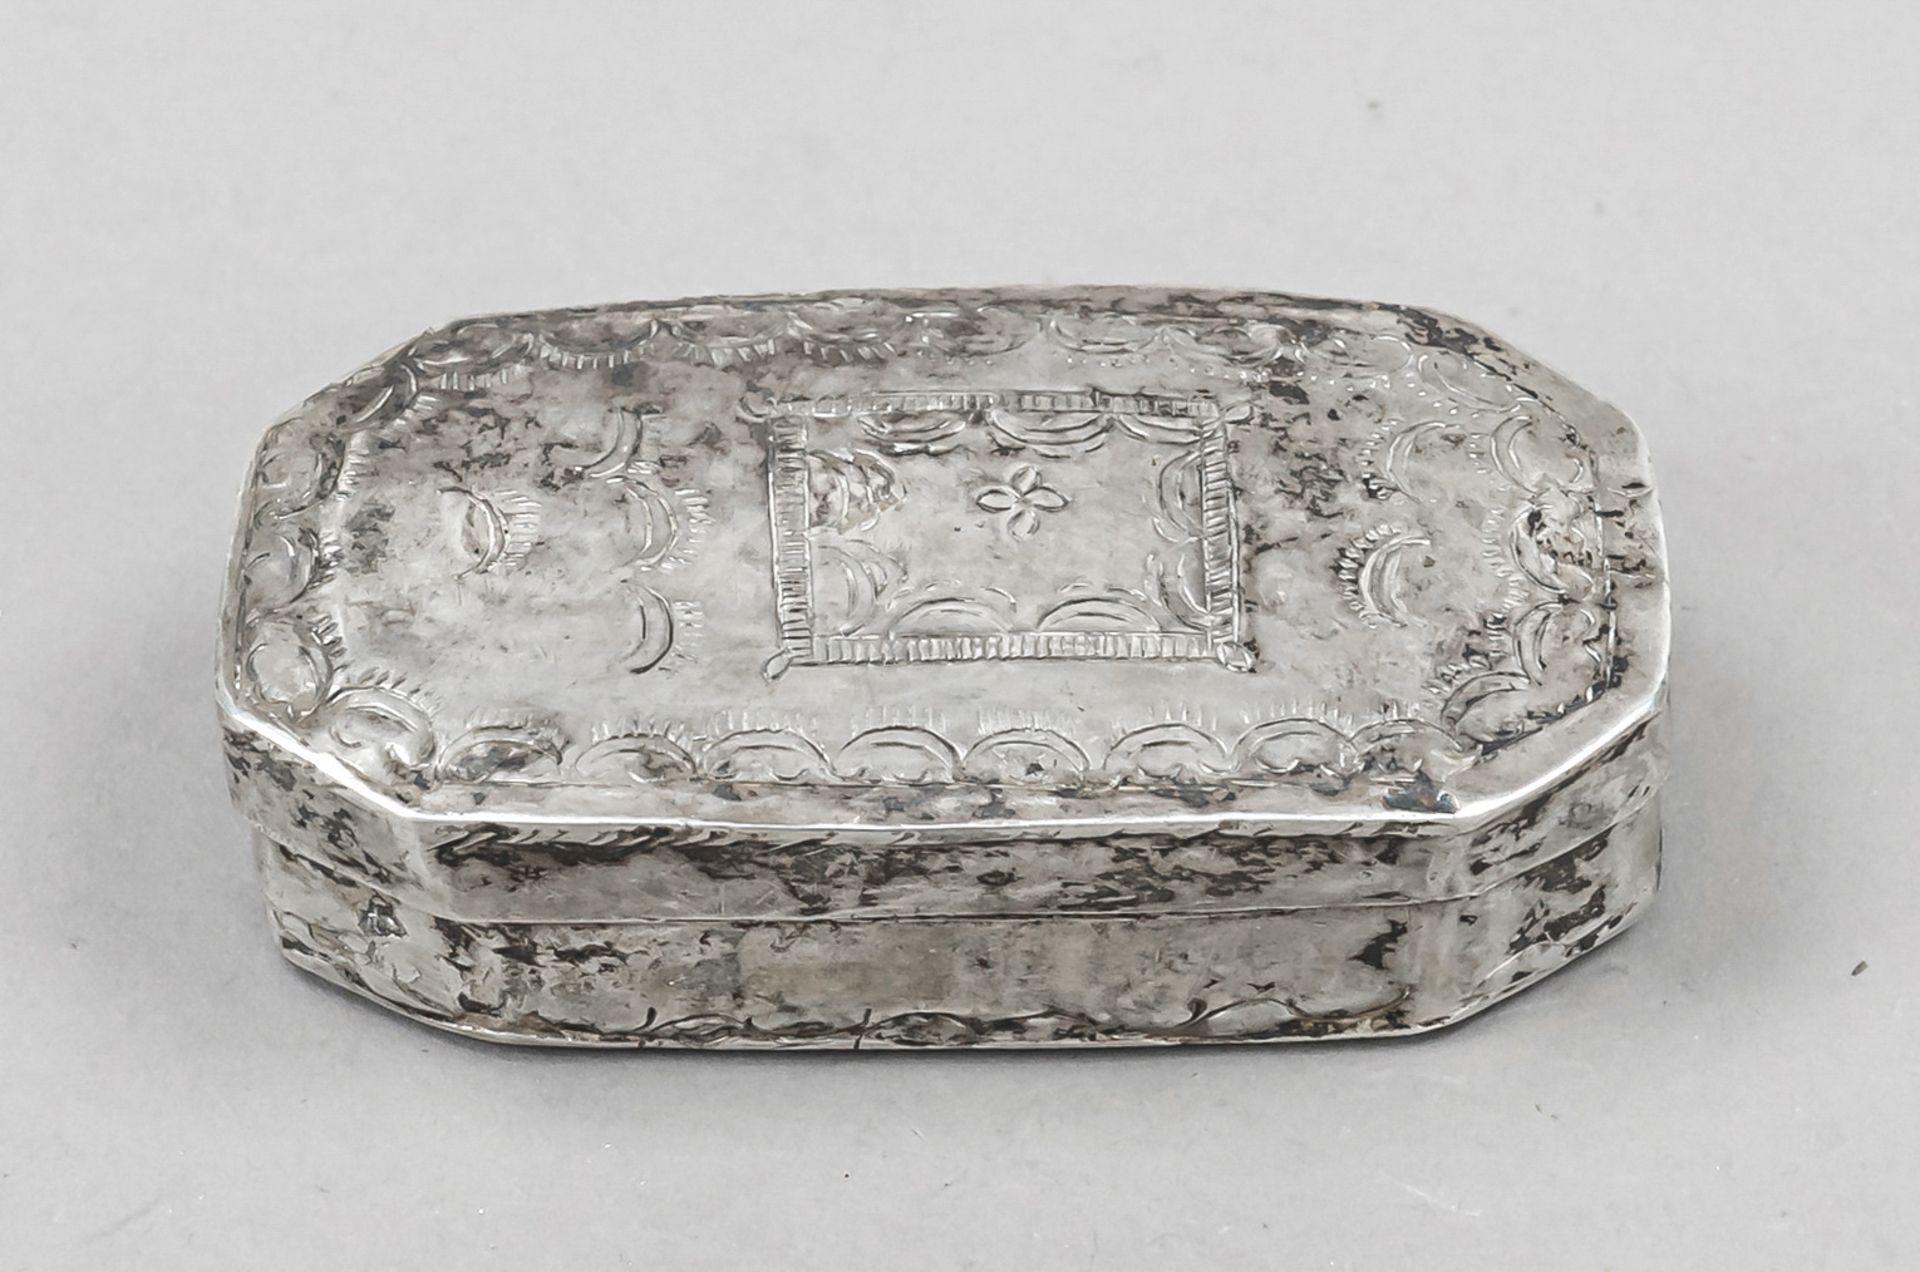 Rectangular lidded box, Indonesia (?), straight form, flattened corners, hinged hinged lid with